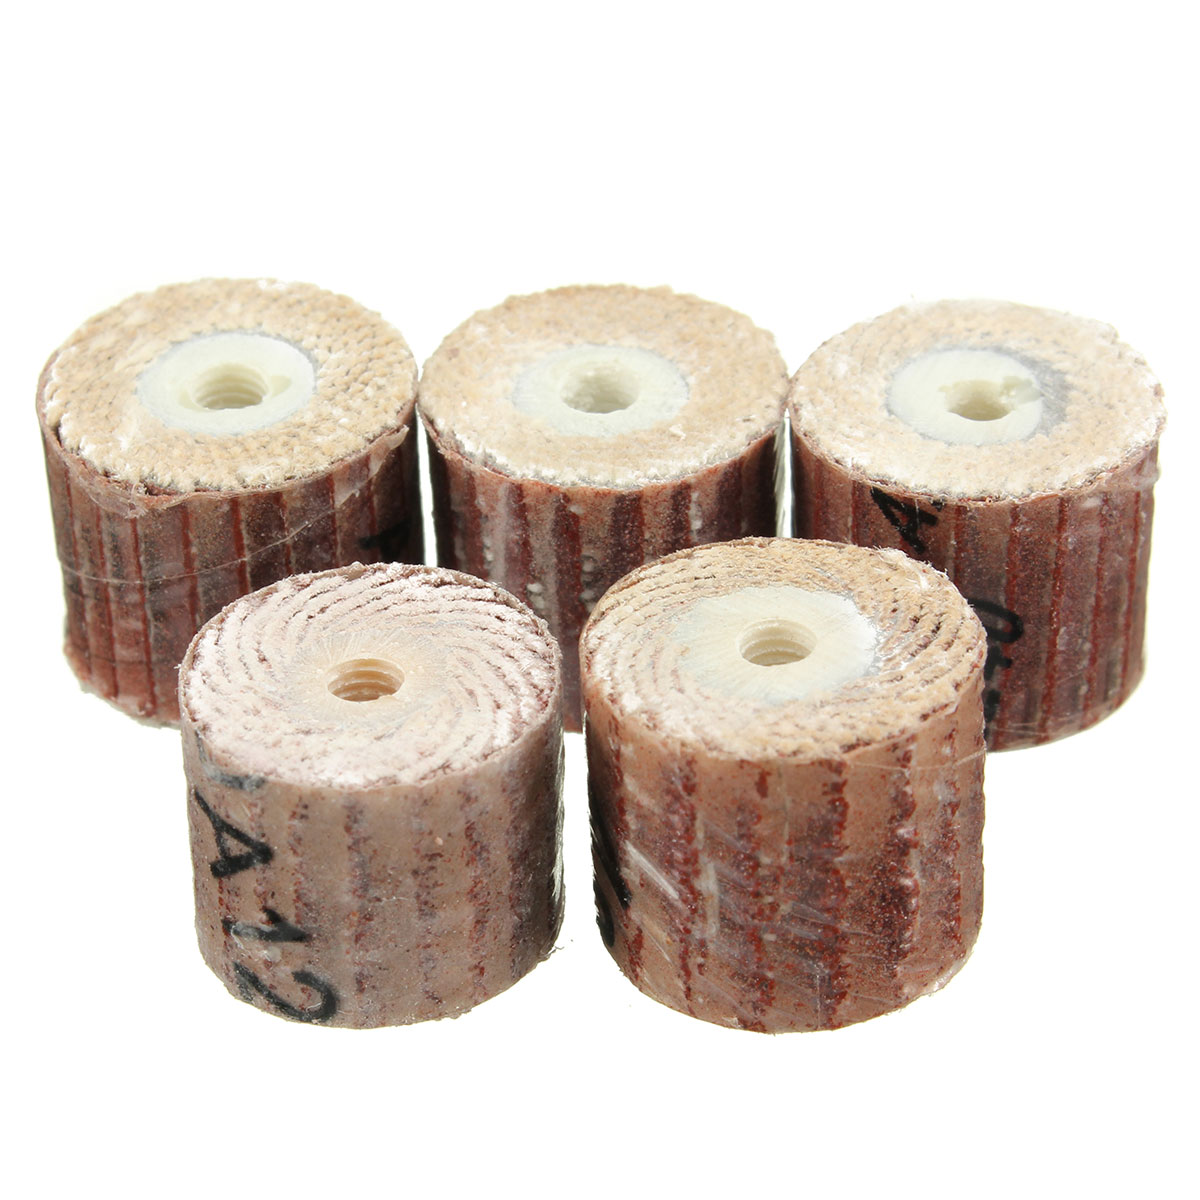 10pcs-12mm-Sandpaper-Grinding-Wheel-80-600-Grit-for-Rotary-Tools-982946-4